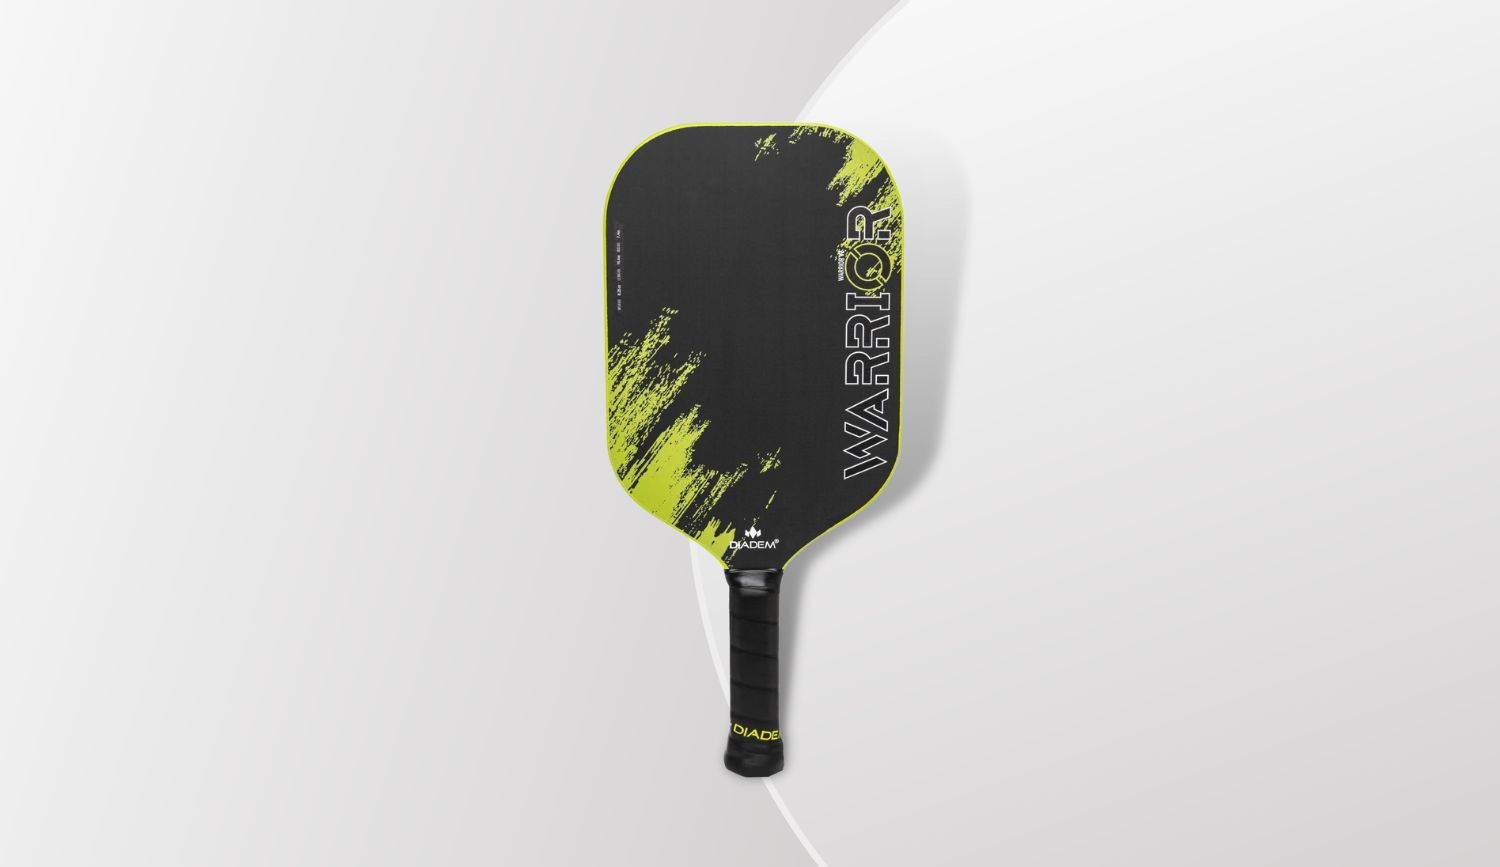 Diadem Warrior V2 Paddle Review (Power, Spin, Control, Feel)